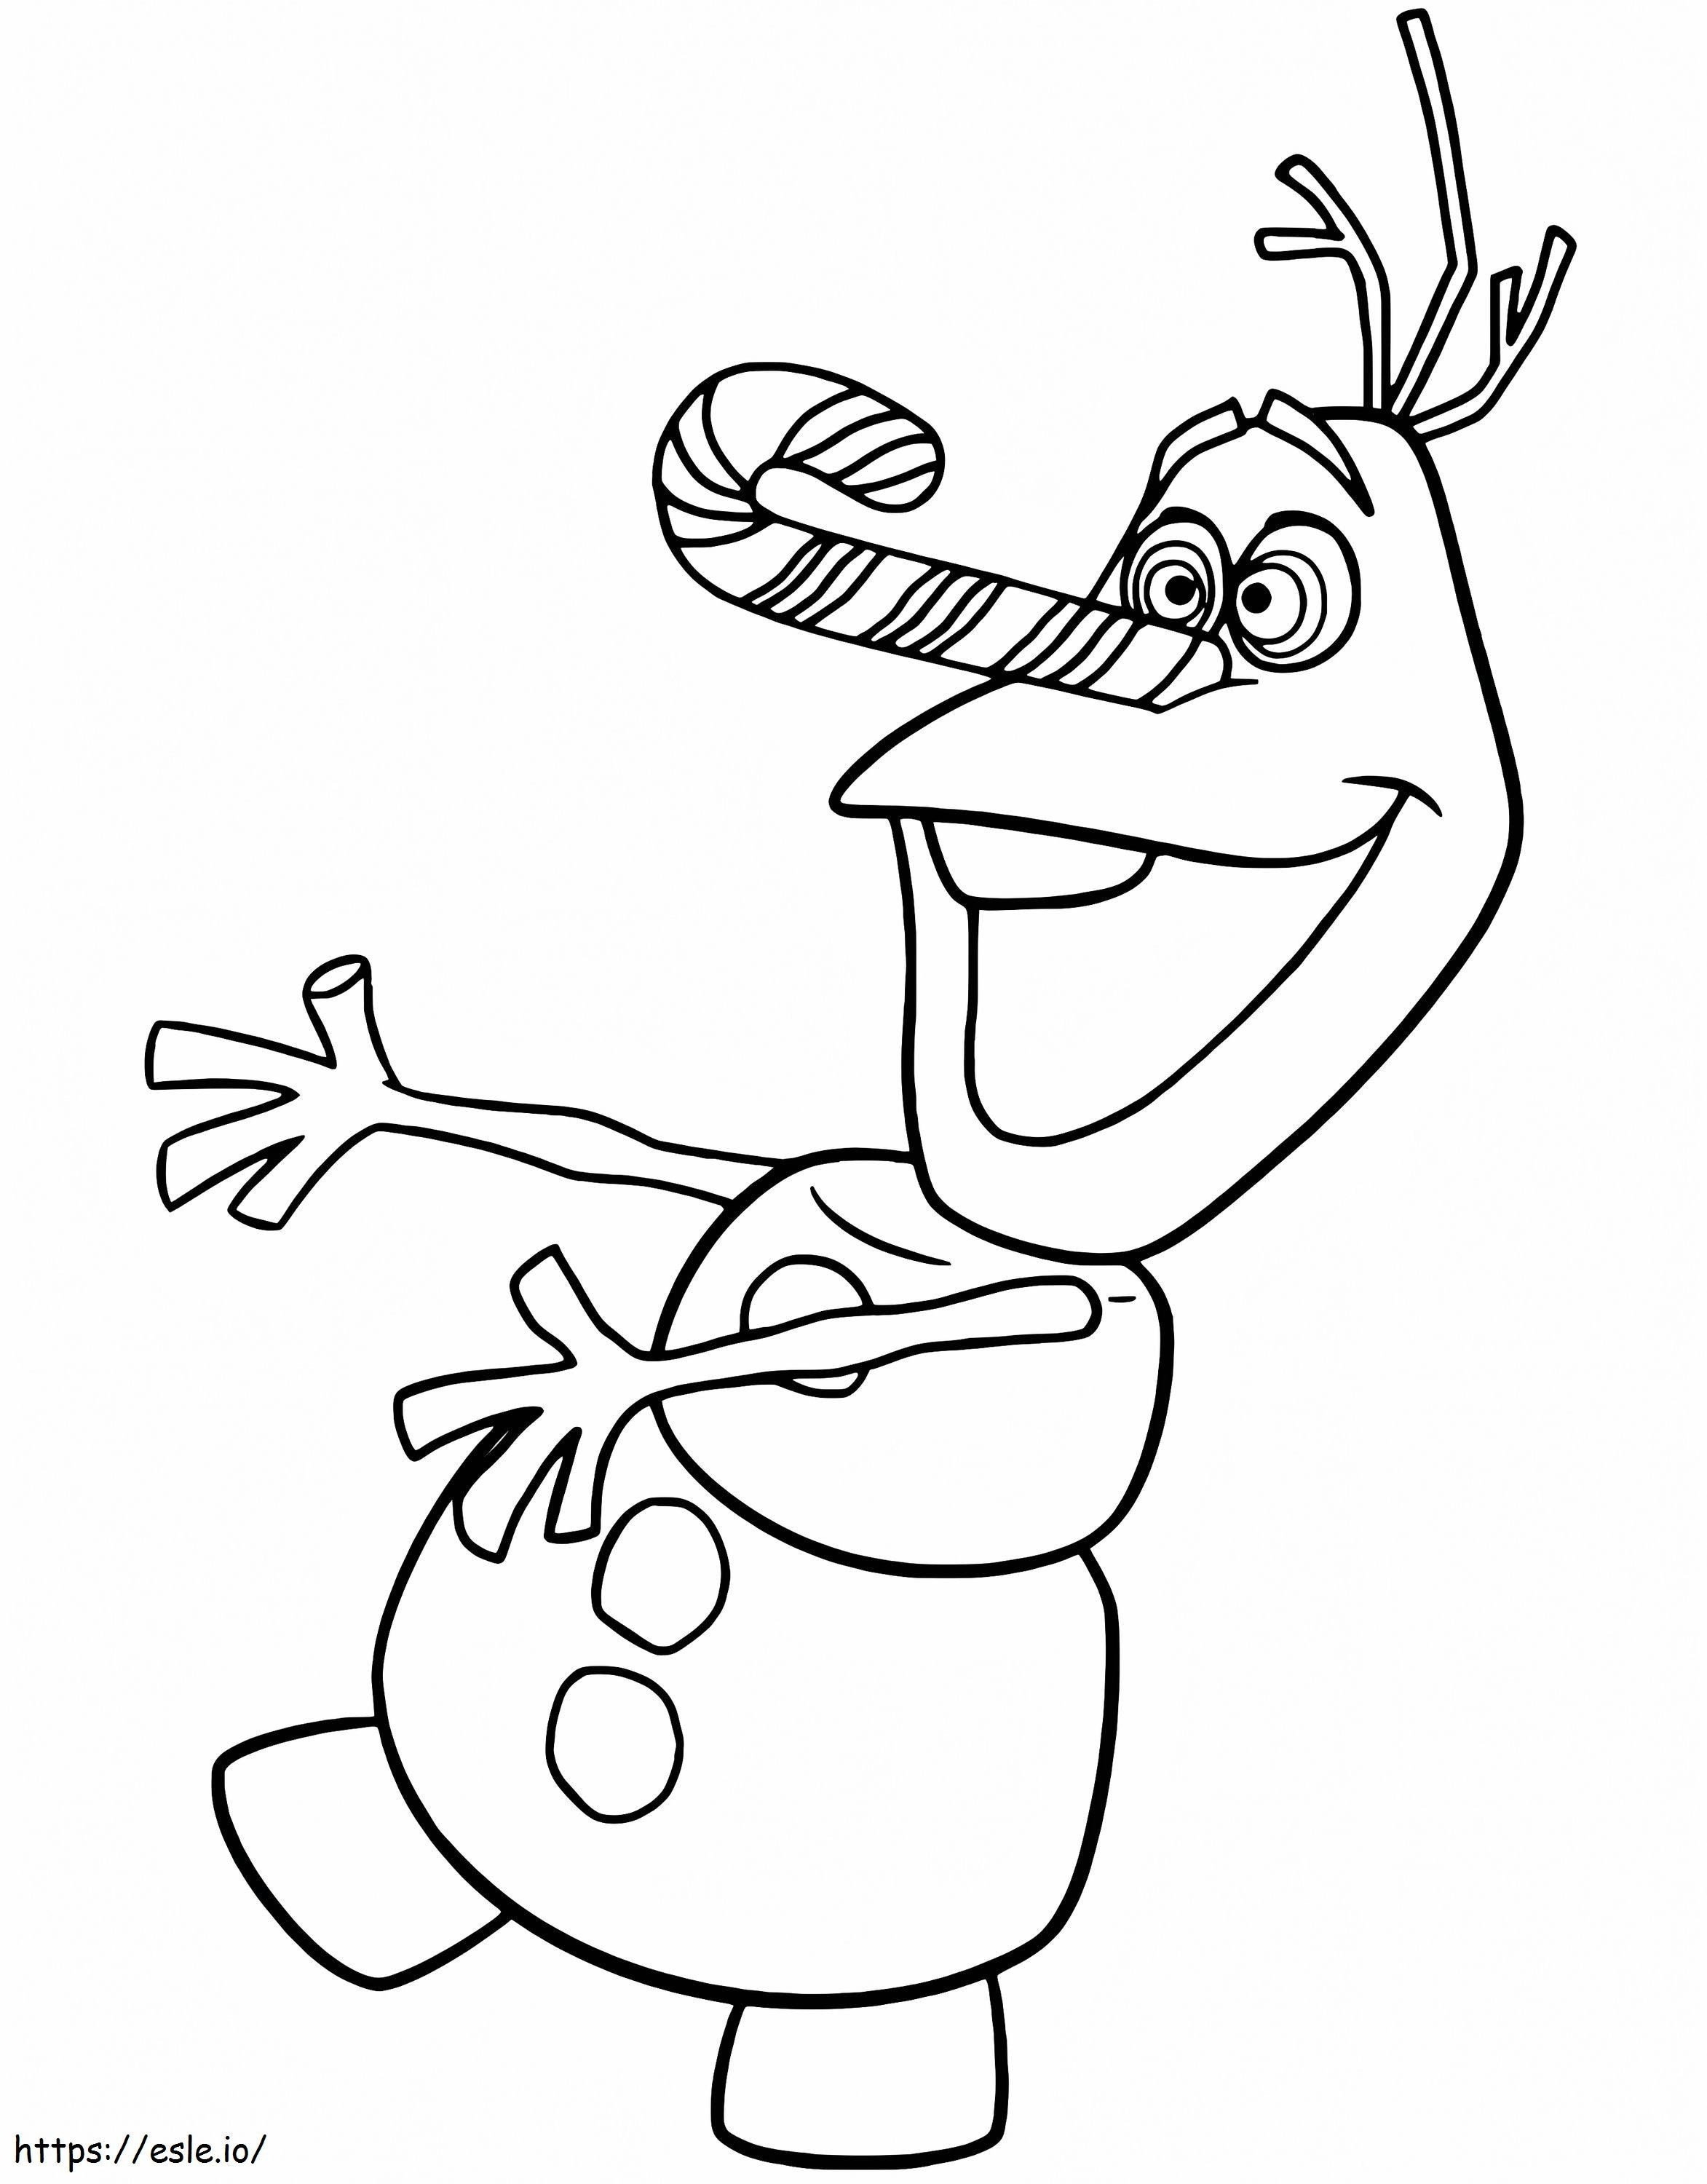 Olaf Fou coloring page